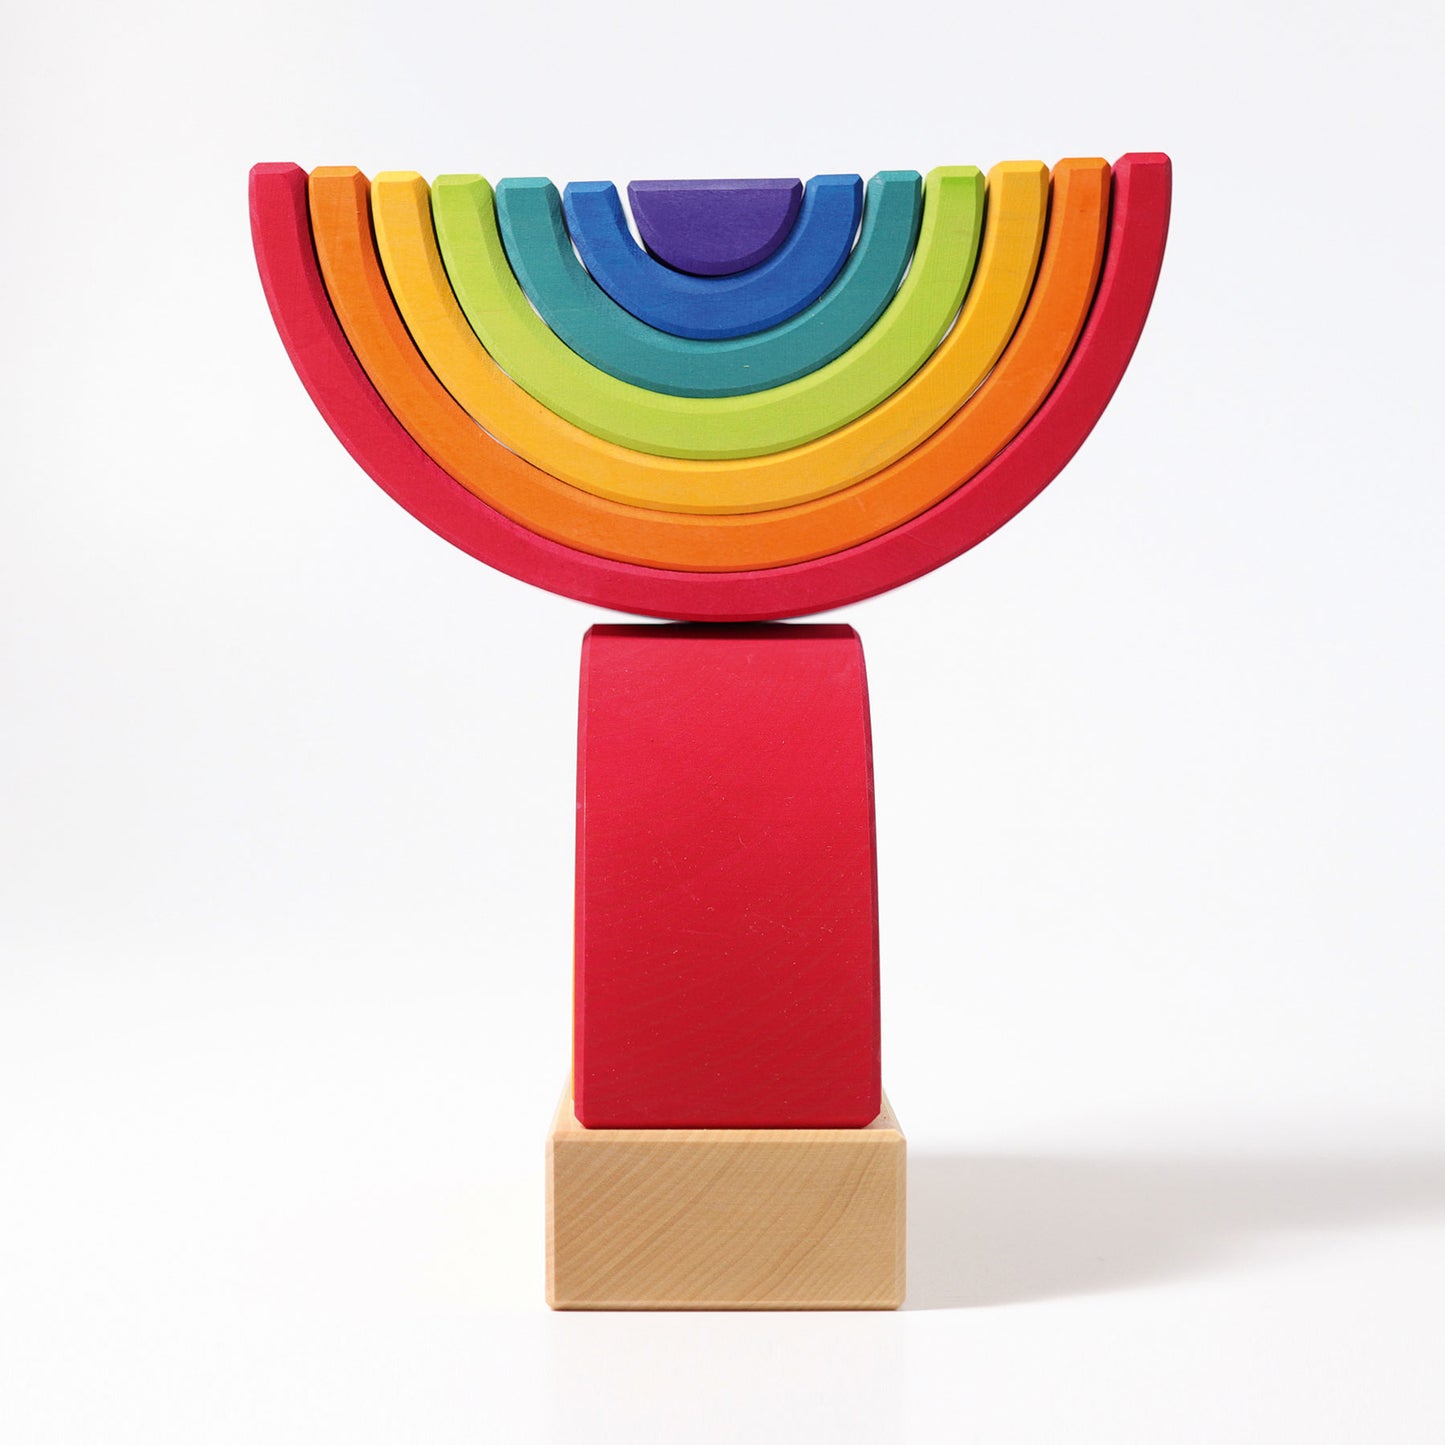 Grimm's Wooden Rainbow Stacking Tower